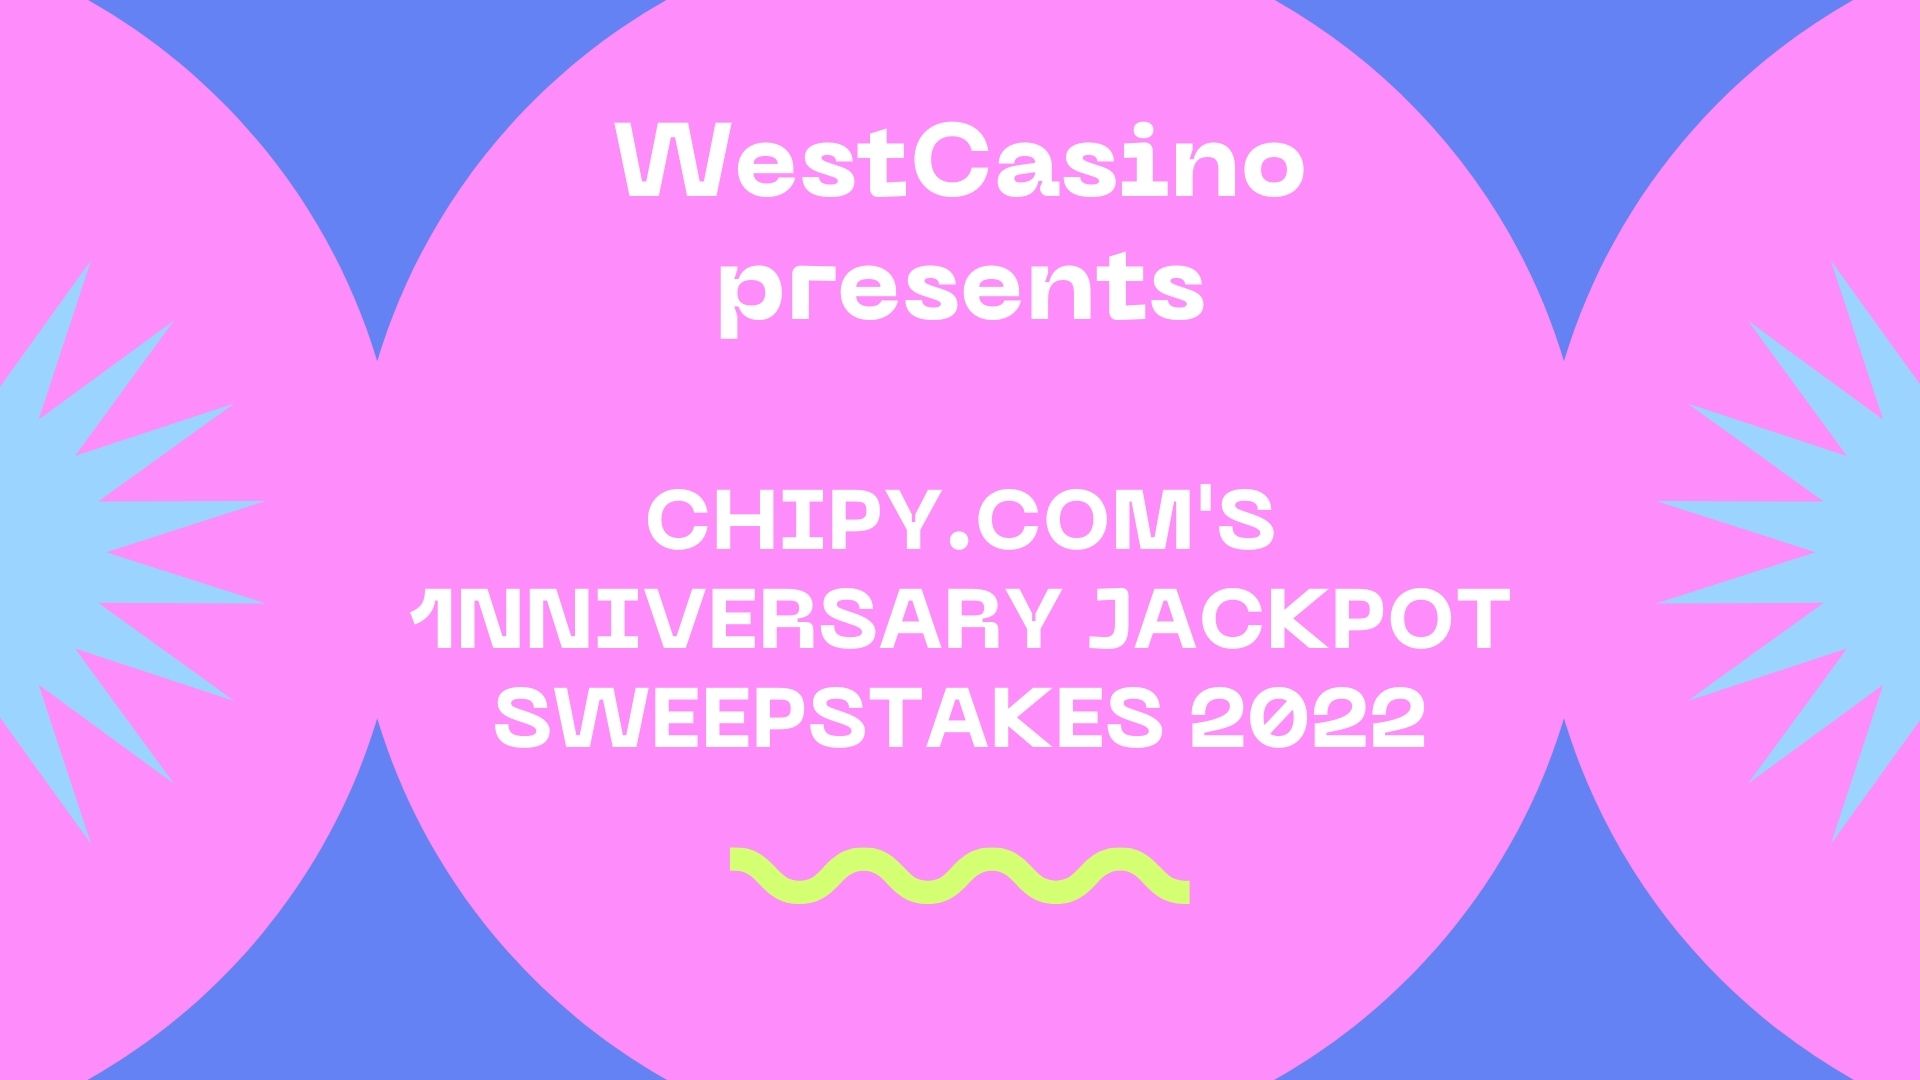 win_big_with_chipycoms_1nniversary_jackpot_sweepstakes_2022